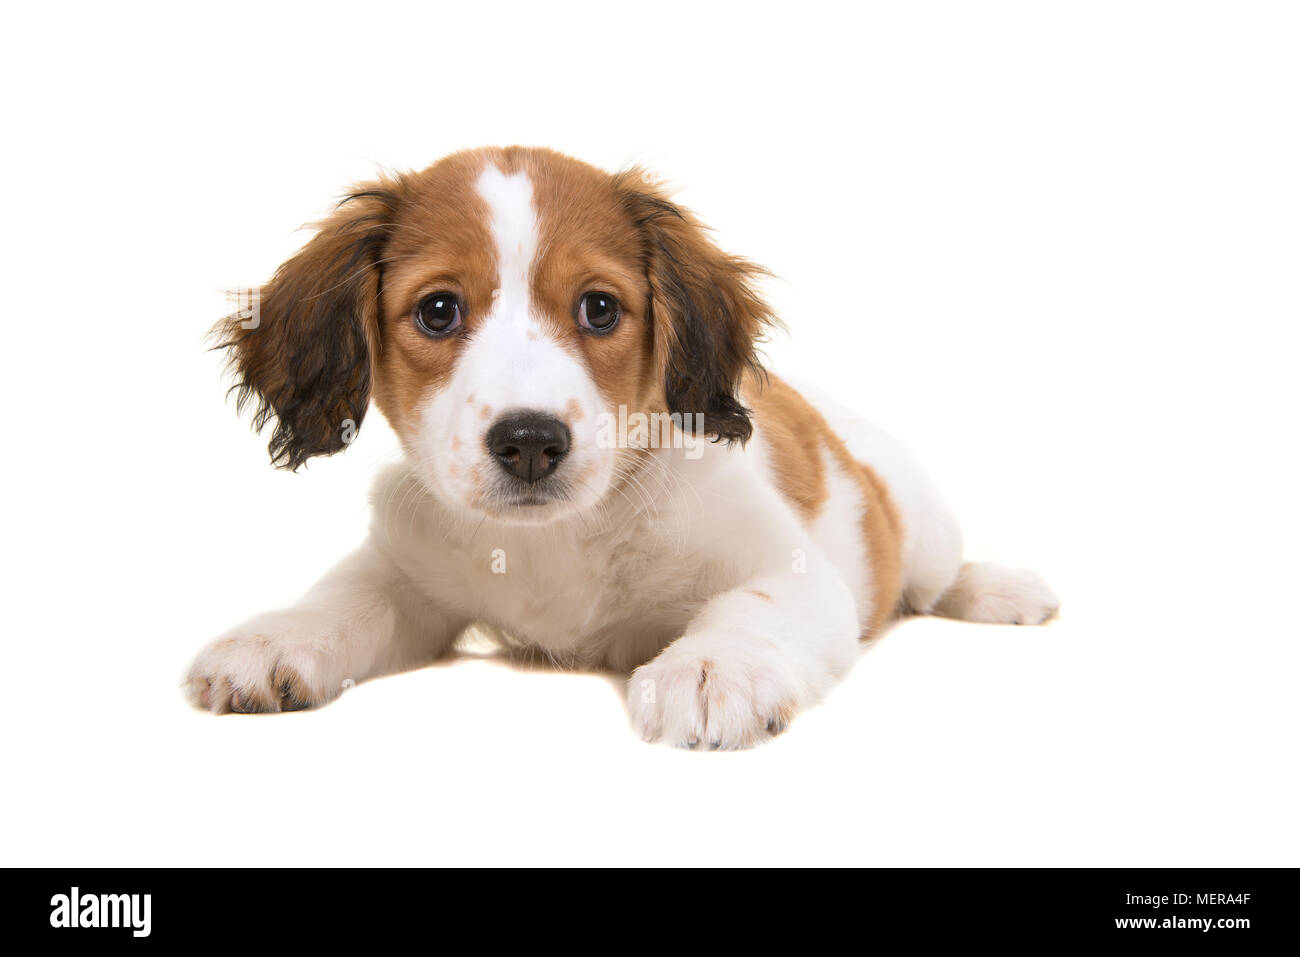 Adorable kooikerhondje puppy lying down looking at the camera isolated on a white background Stock Photo